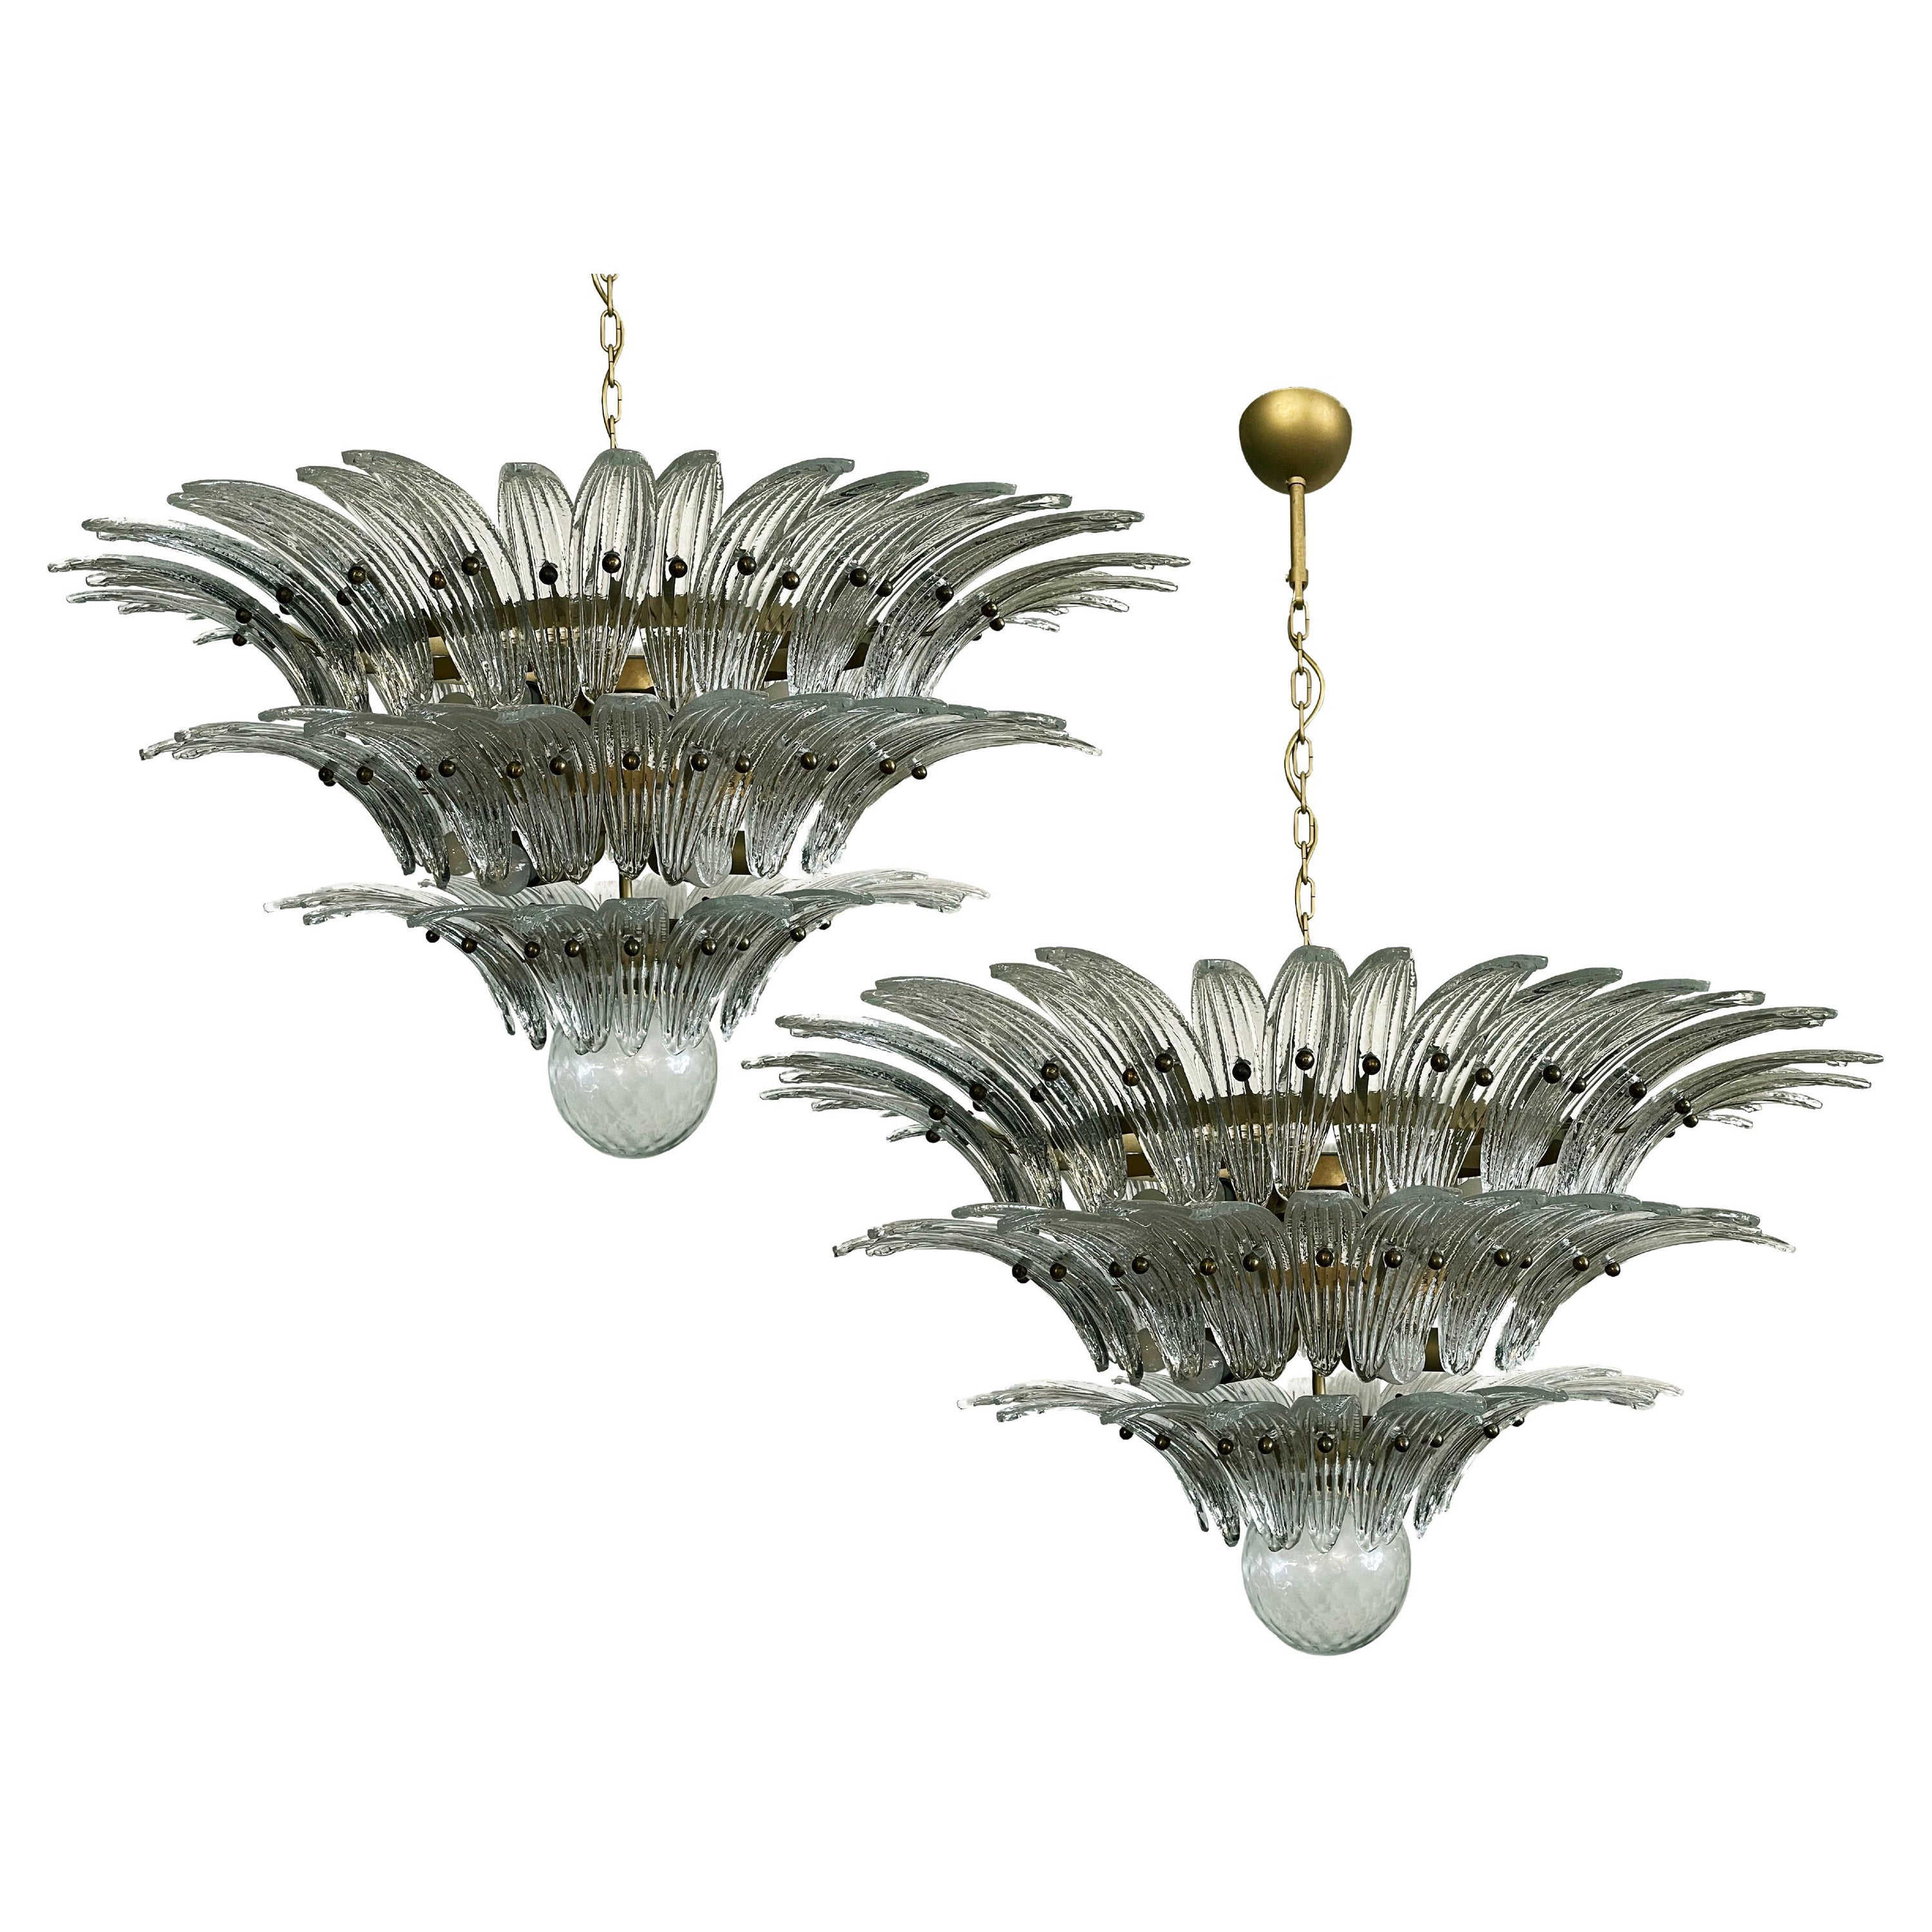 Pair Spectacular Italian Glass Chandeliers, Murano For Sale